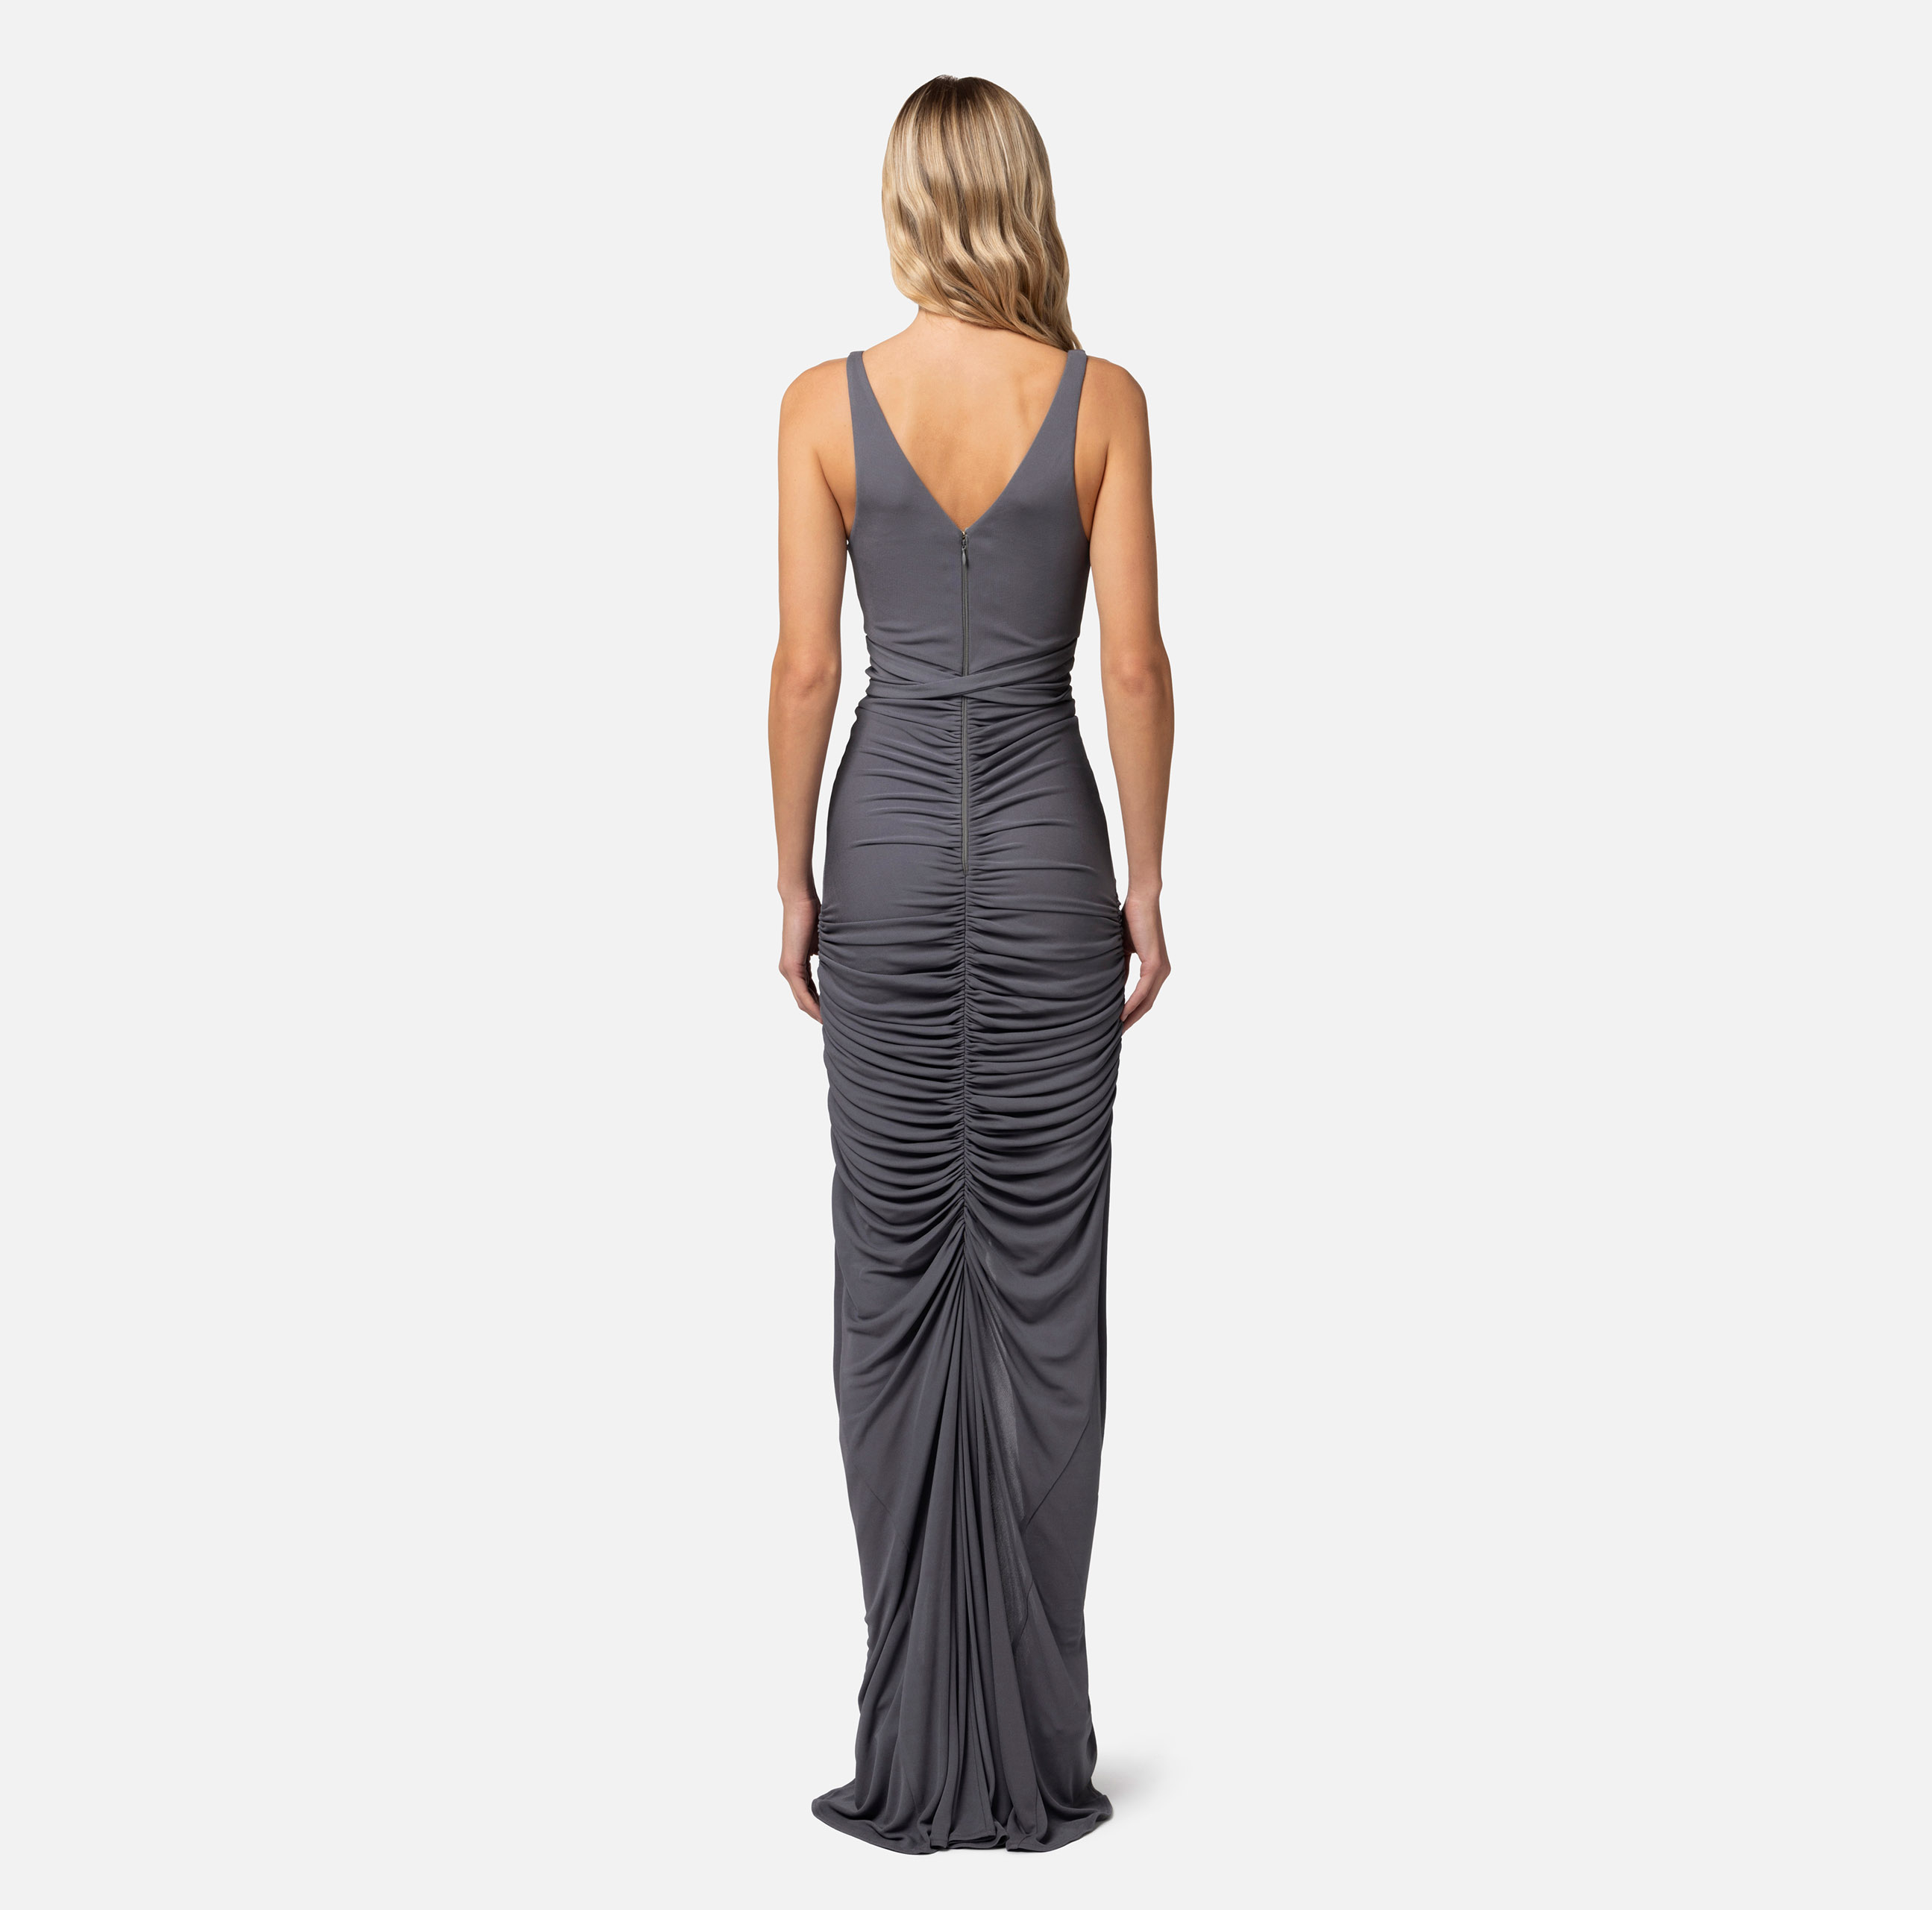 Red carpet dress in draped jersey with piercing - Elisabetta Franchi